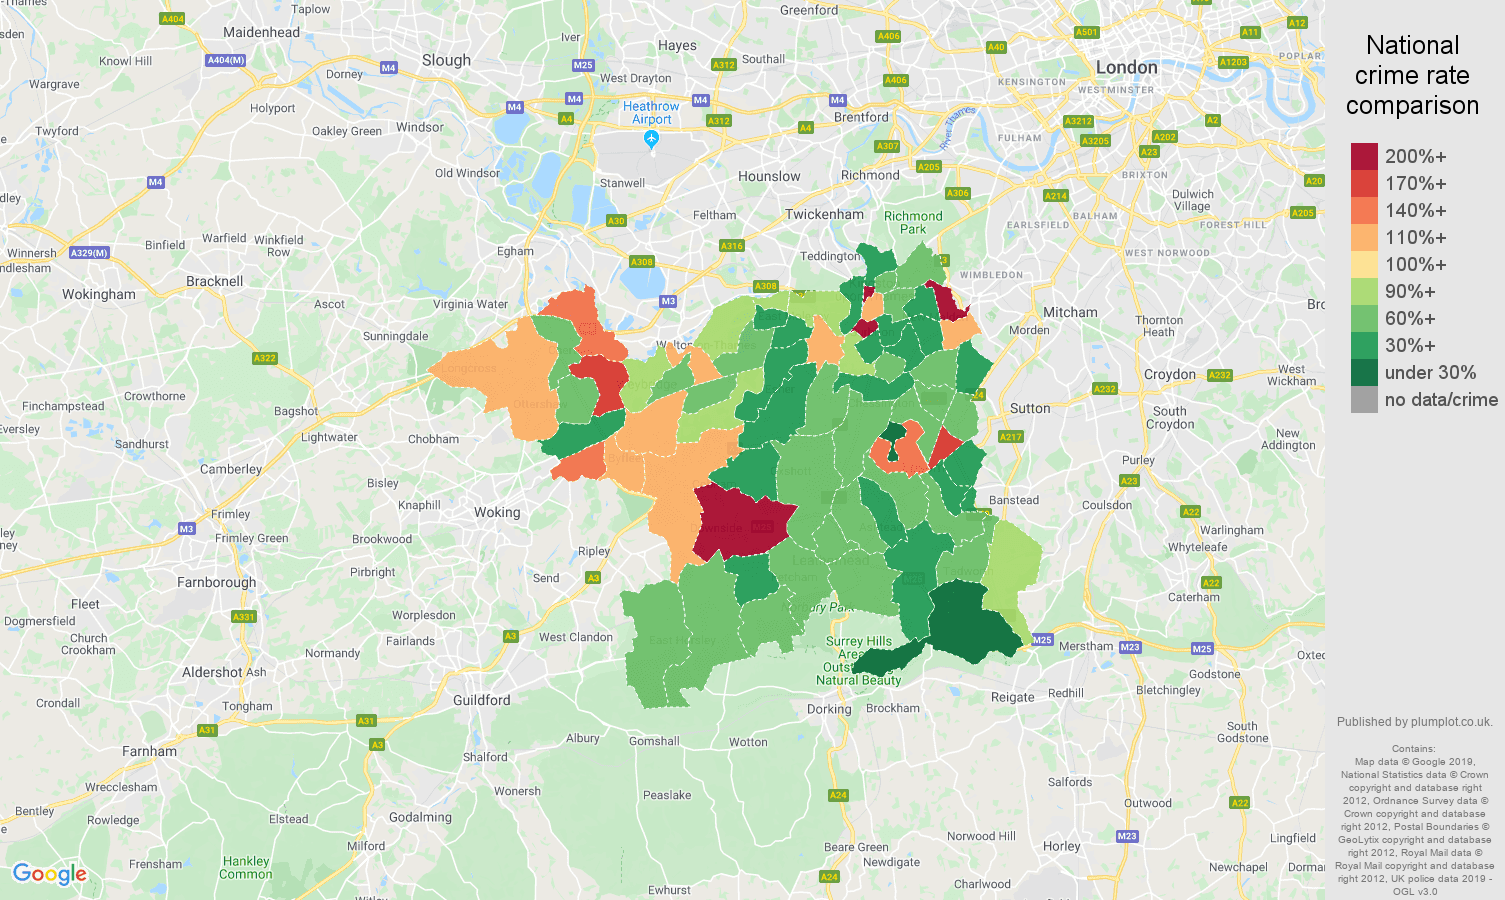 Kingston upon Thames other theft crime rate comparison map